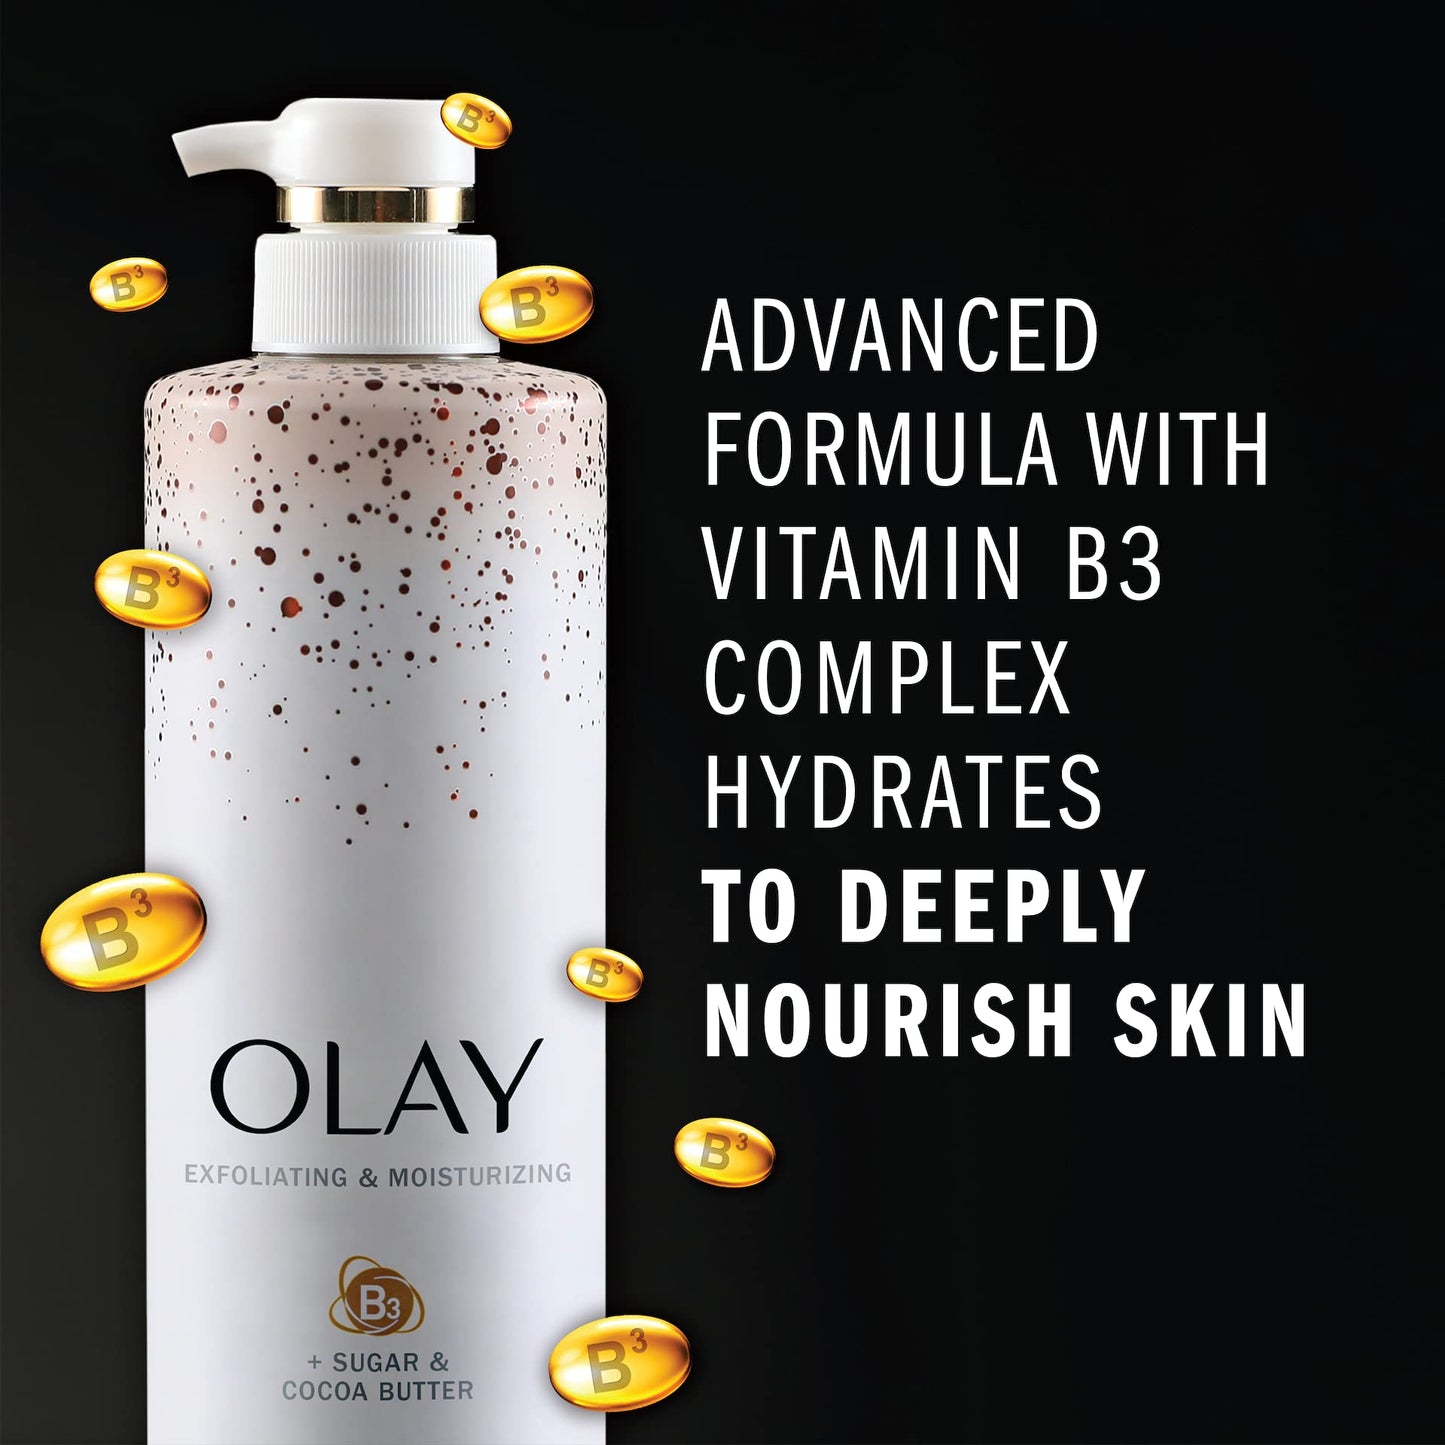 Olay Exfoliating & Moisturizing Body Wash With Sugar Cocoa Butter and Vitamin B3 20 Fl Ounce (Pack of 4)